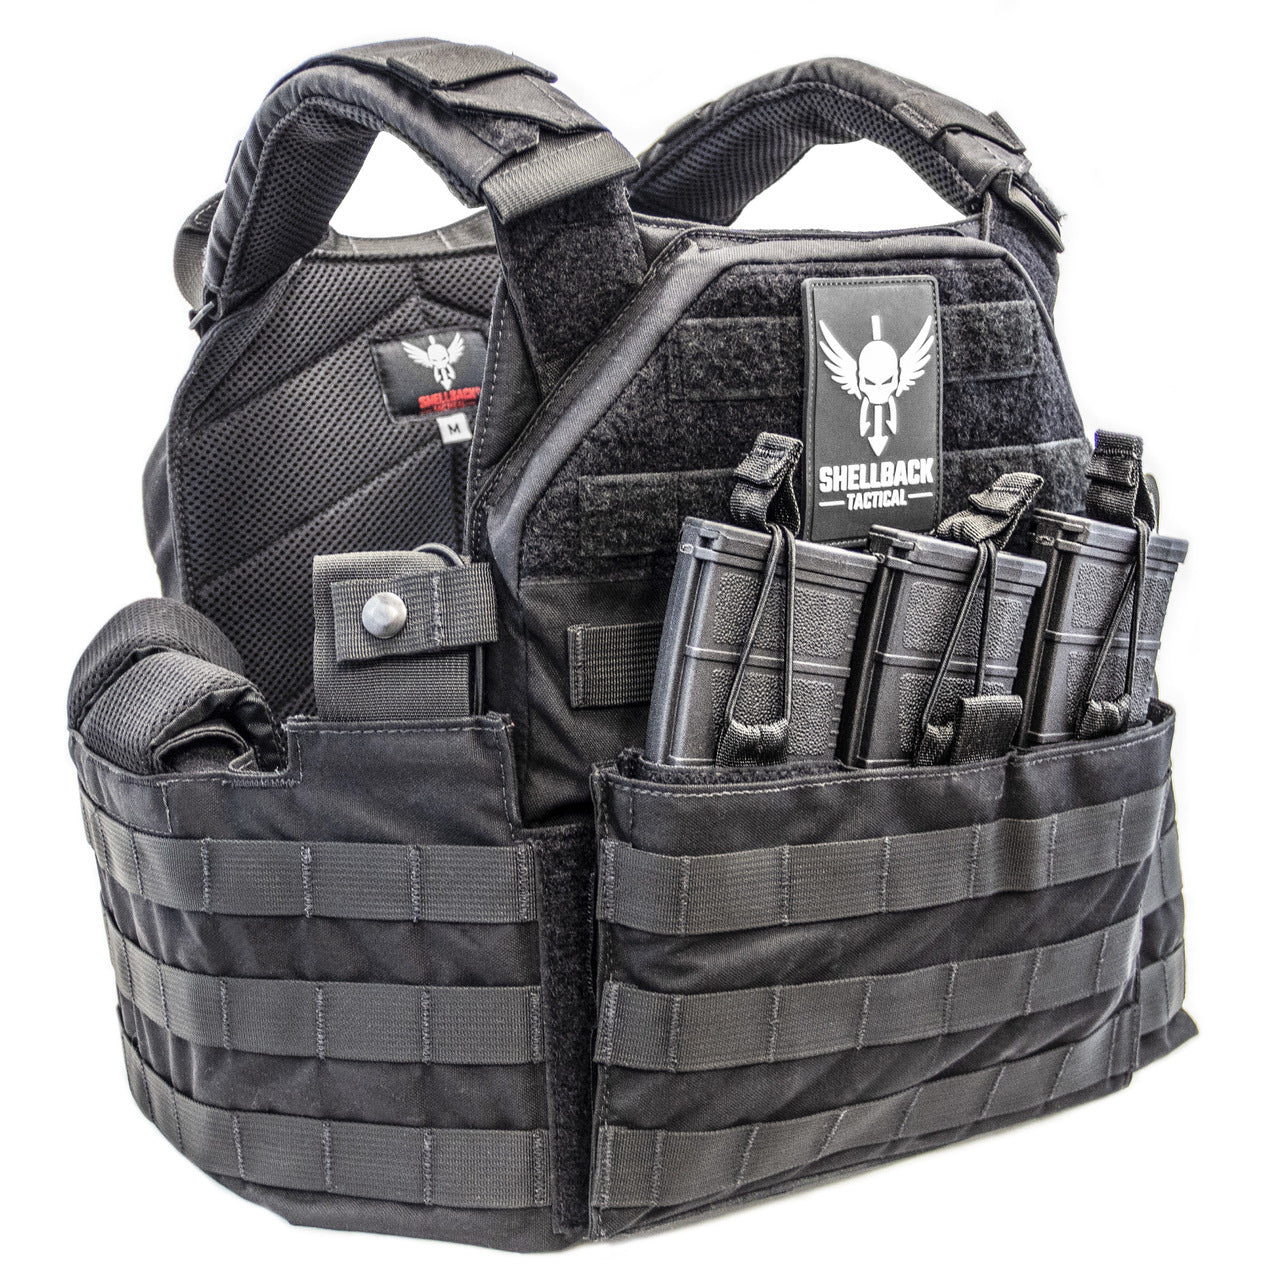 The modular and low profile Shellback Tactical SF Plate Carrier, manufactured by Shellback Tactical, is a combat ready plate carrier with a multitude of compartments.